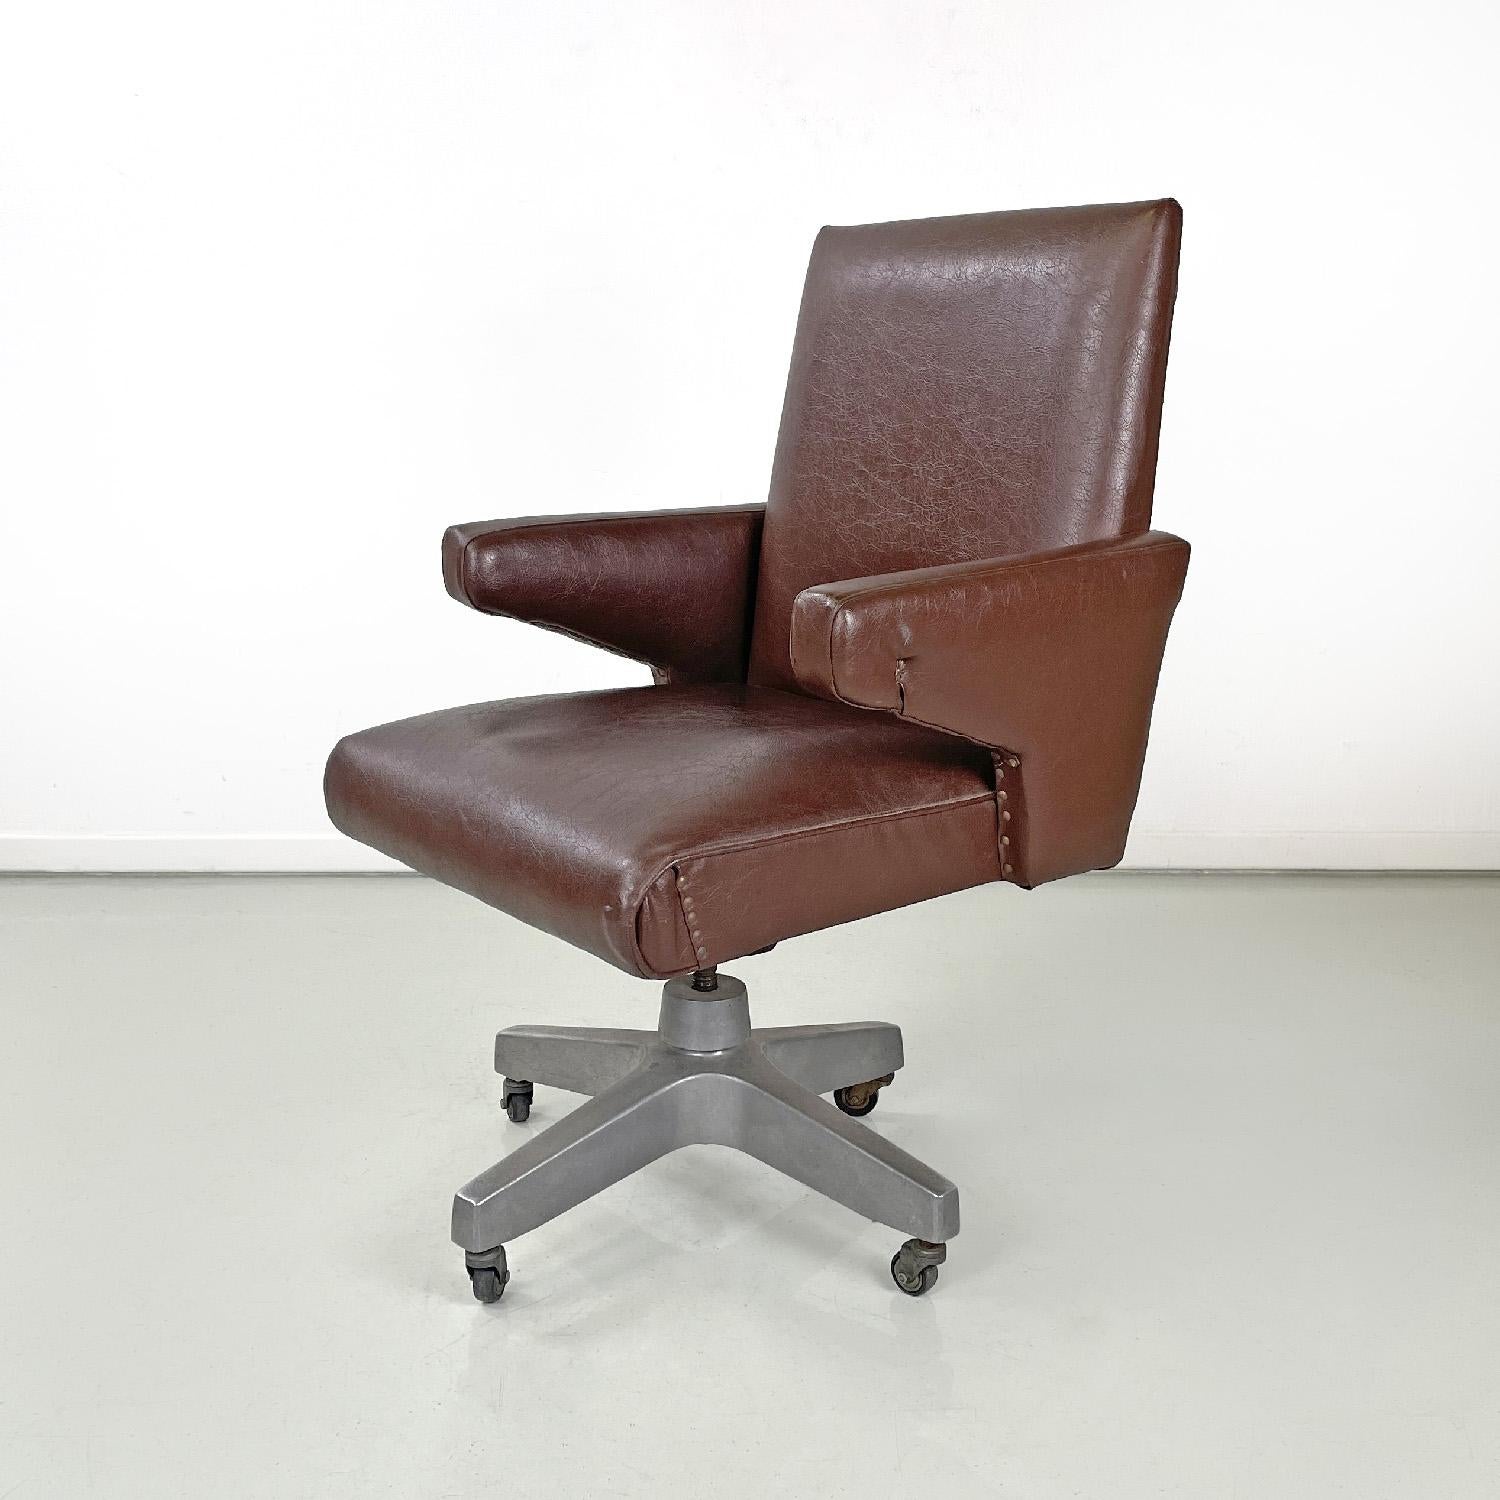 Italian mid-century modern brown leather swivel armchair with brass studs, 1950s
Brown leather swivel chair. The seat and backrest are rectangular and the armrests are squared with a geometric shape, with two decorative studs in the shape of a